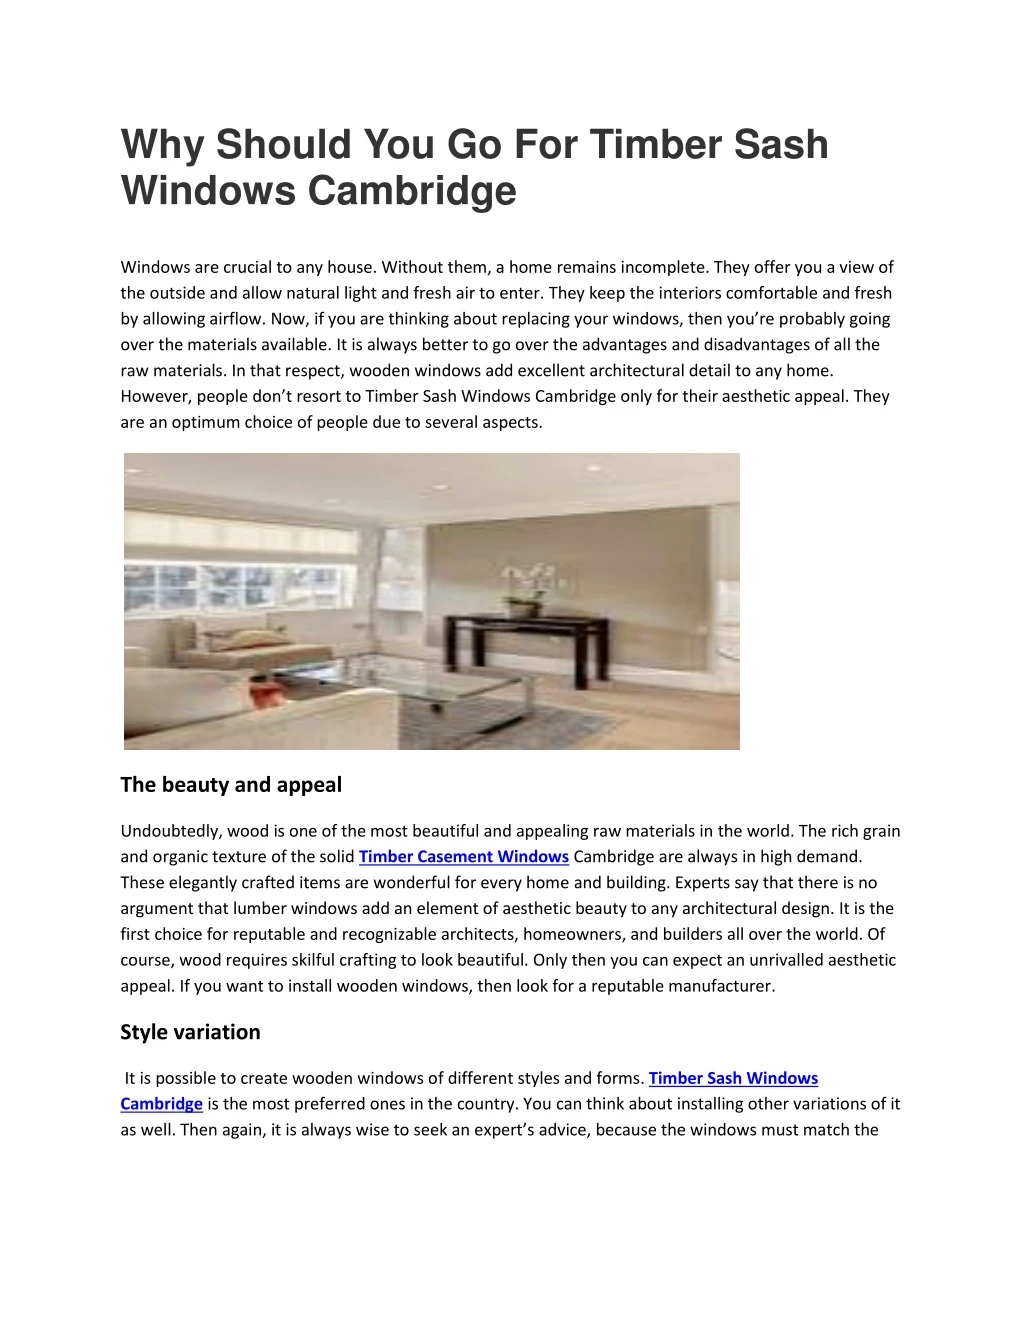 why should you go for timber sash windows